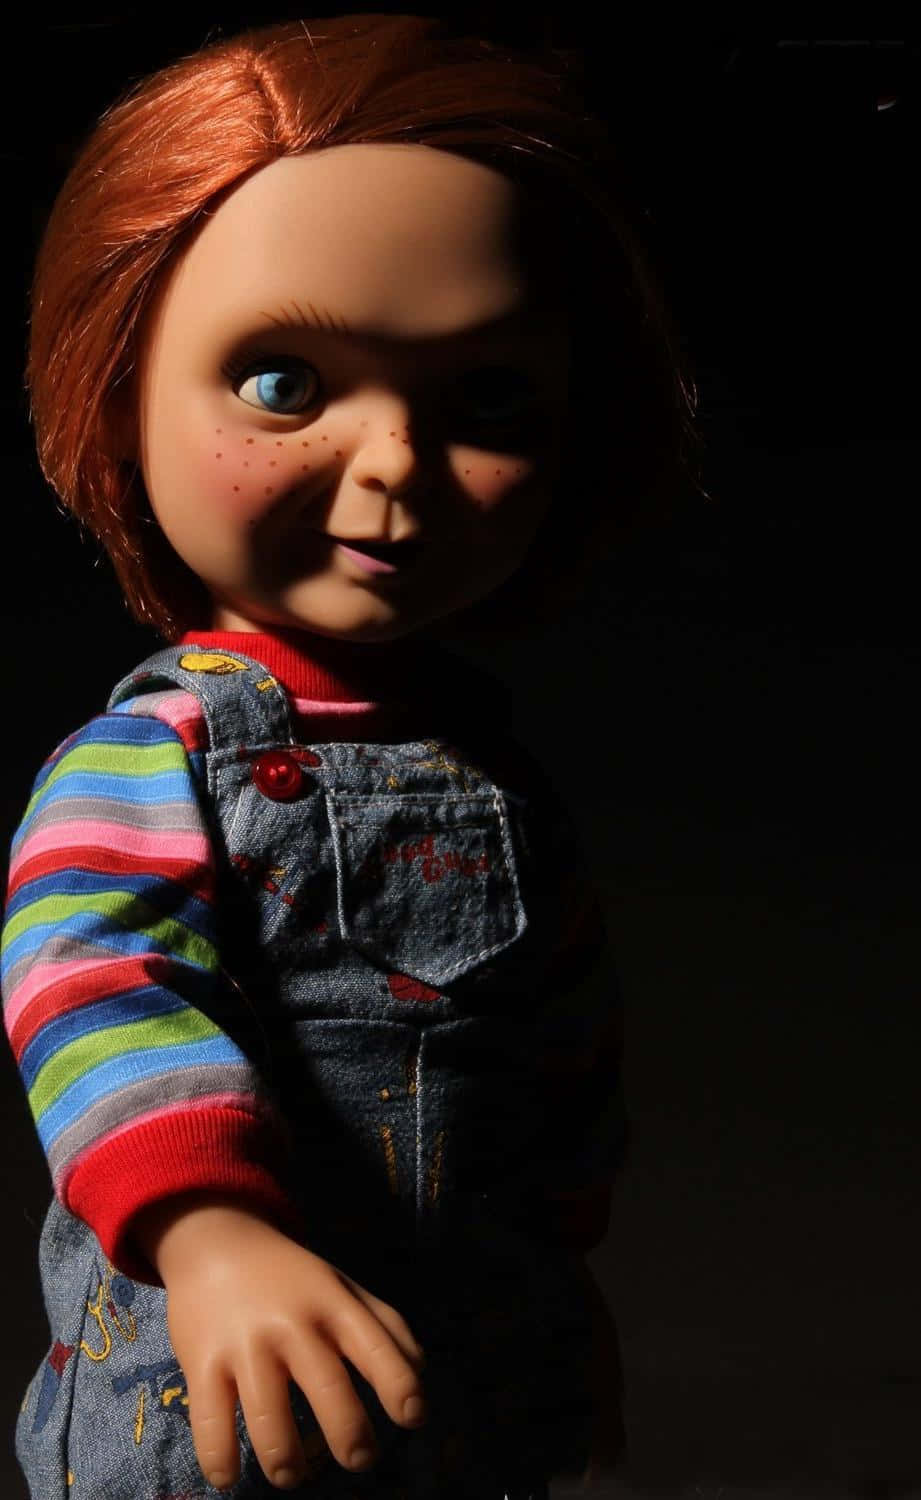 Join Chucky on His Horror adventures